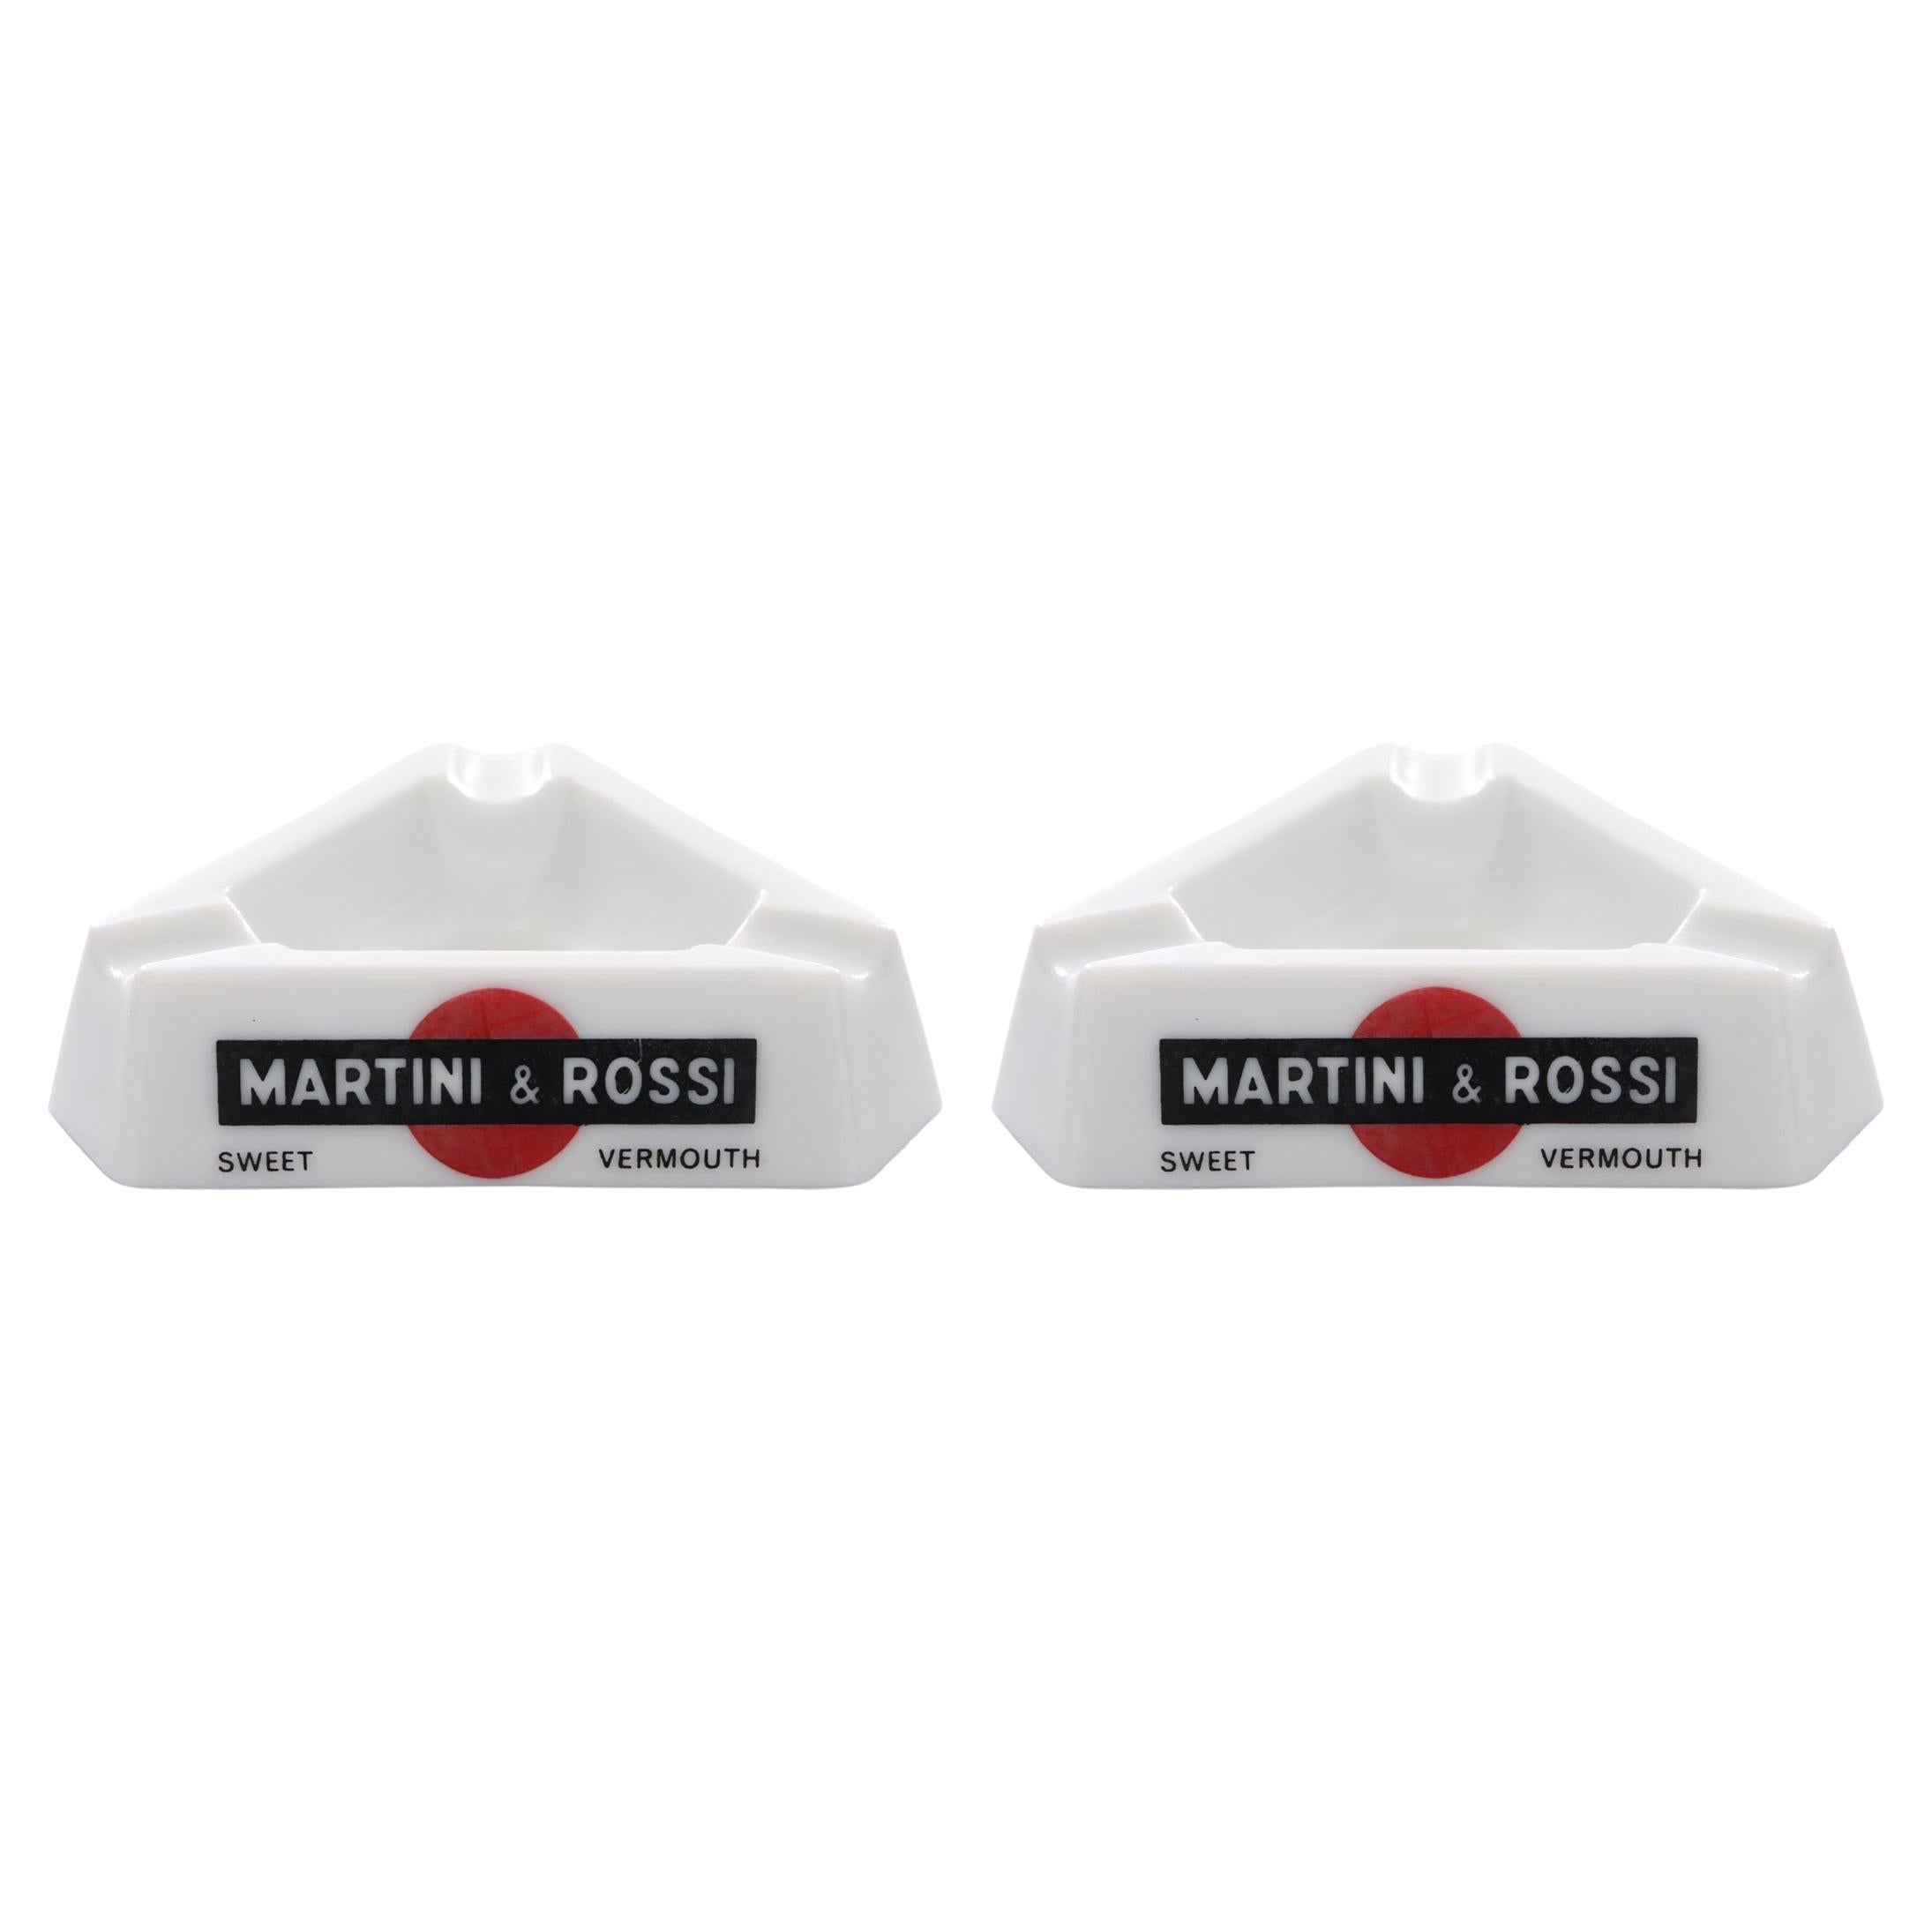 Martini & Rossi Sweet Vermouth French Ashtrays - a Pair